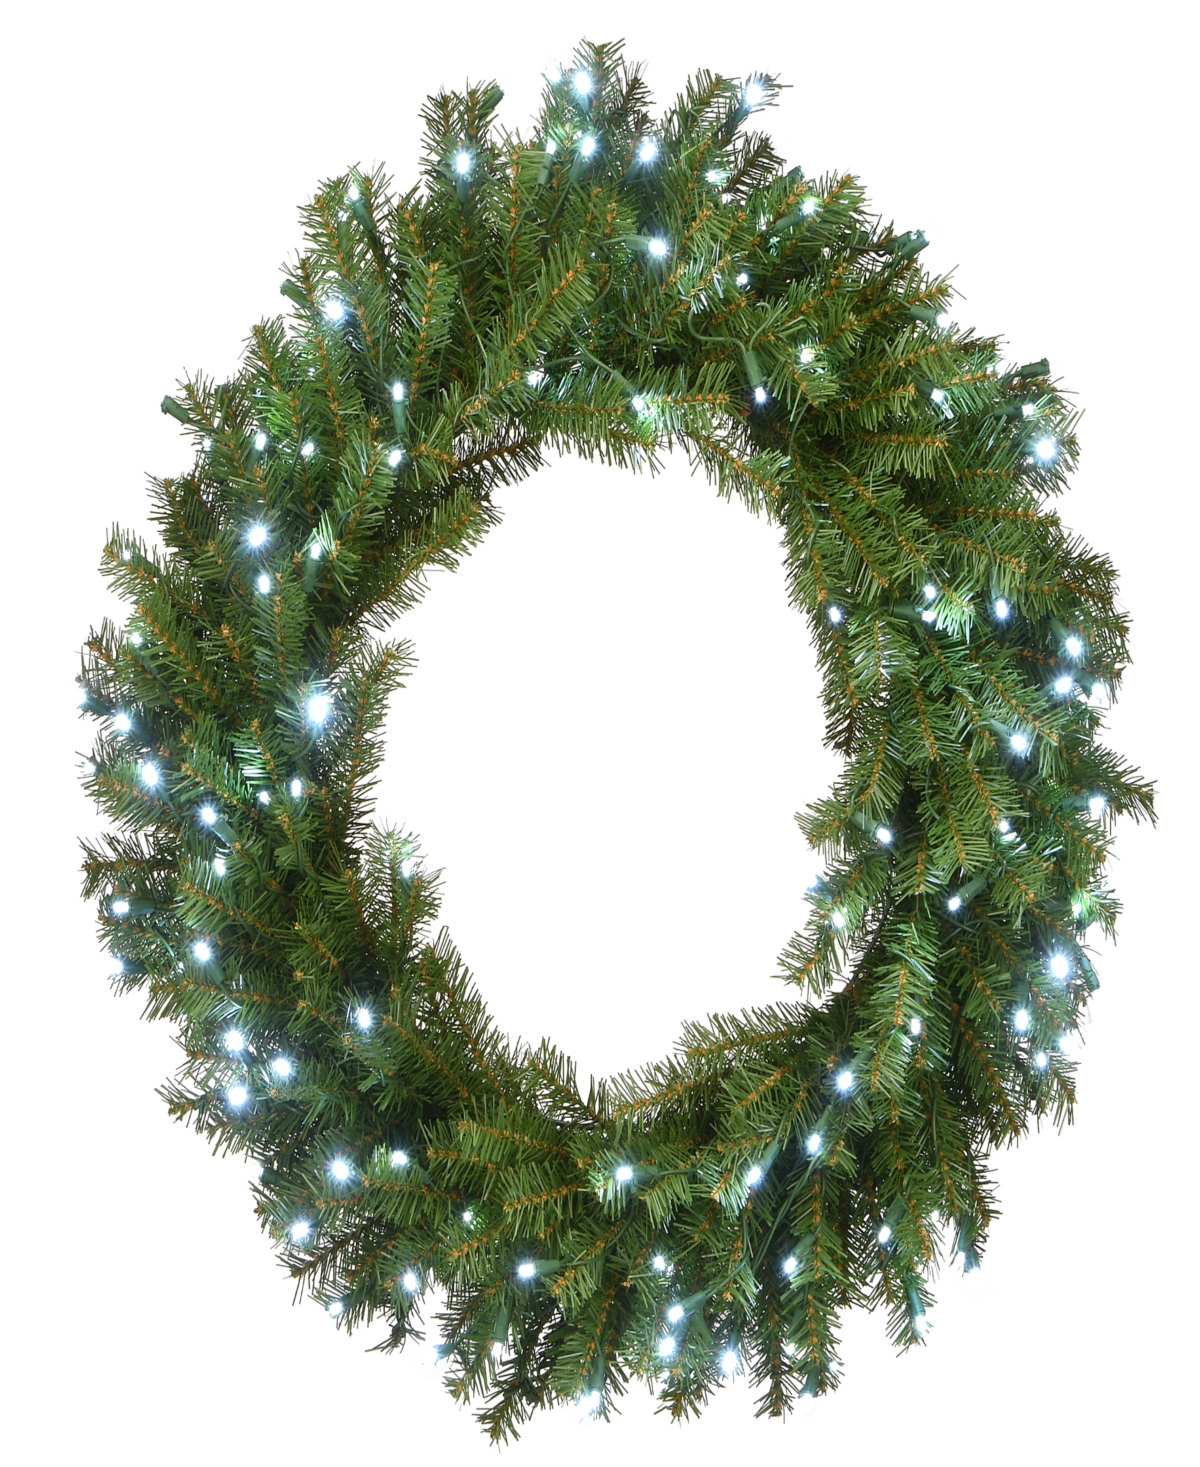 Le Present National Tree Company 30" Memory-shape Norwood Fir Wreath With Led Lights In Green